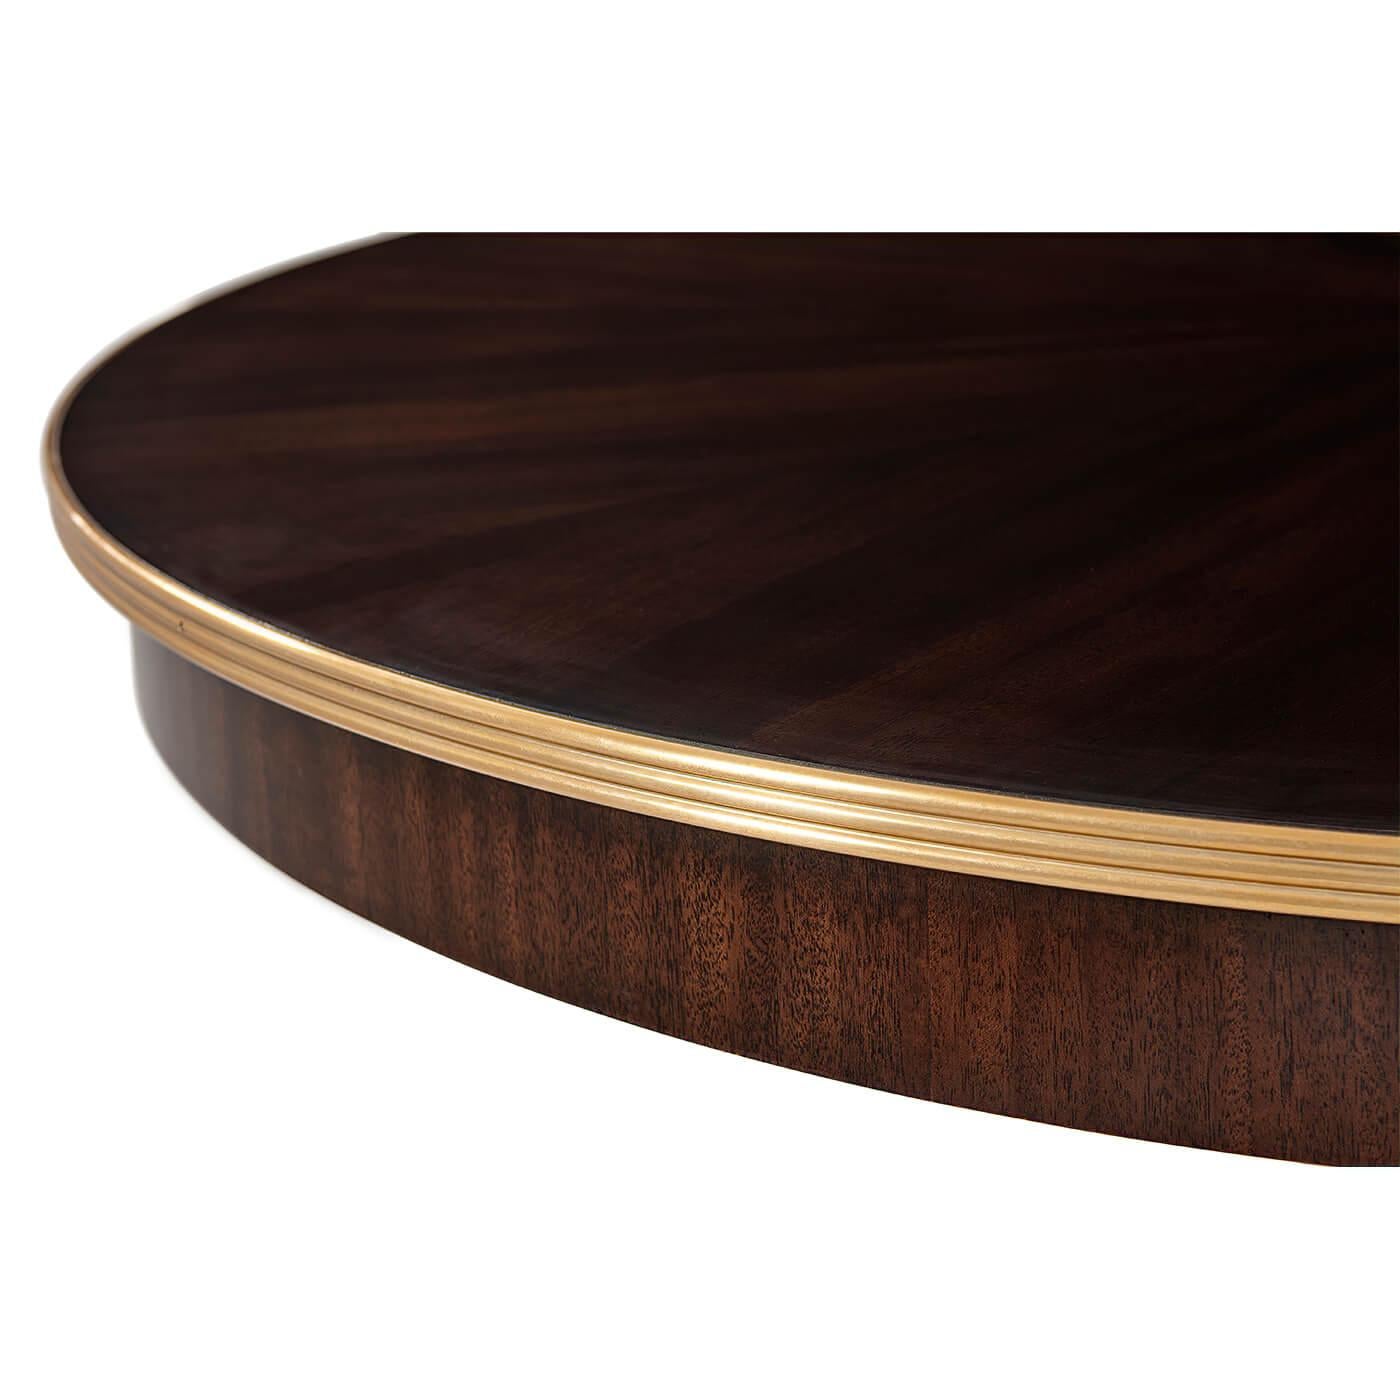 Modern Classic center table. The perfect petit dining room table or essential entryway table - the choice is yours. The round sunburst tabletop is figured in Mahogany veneer with a reeded edge outlined in brass. The down-swept monolithic table